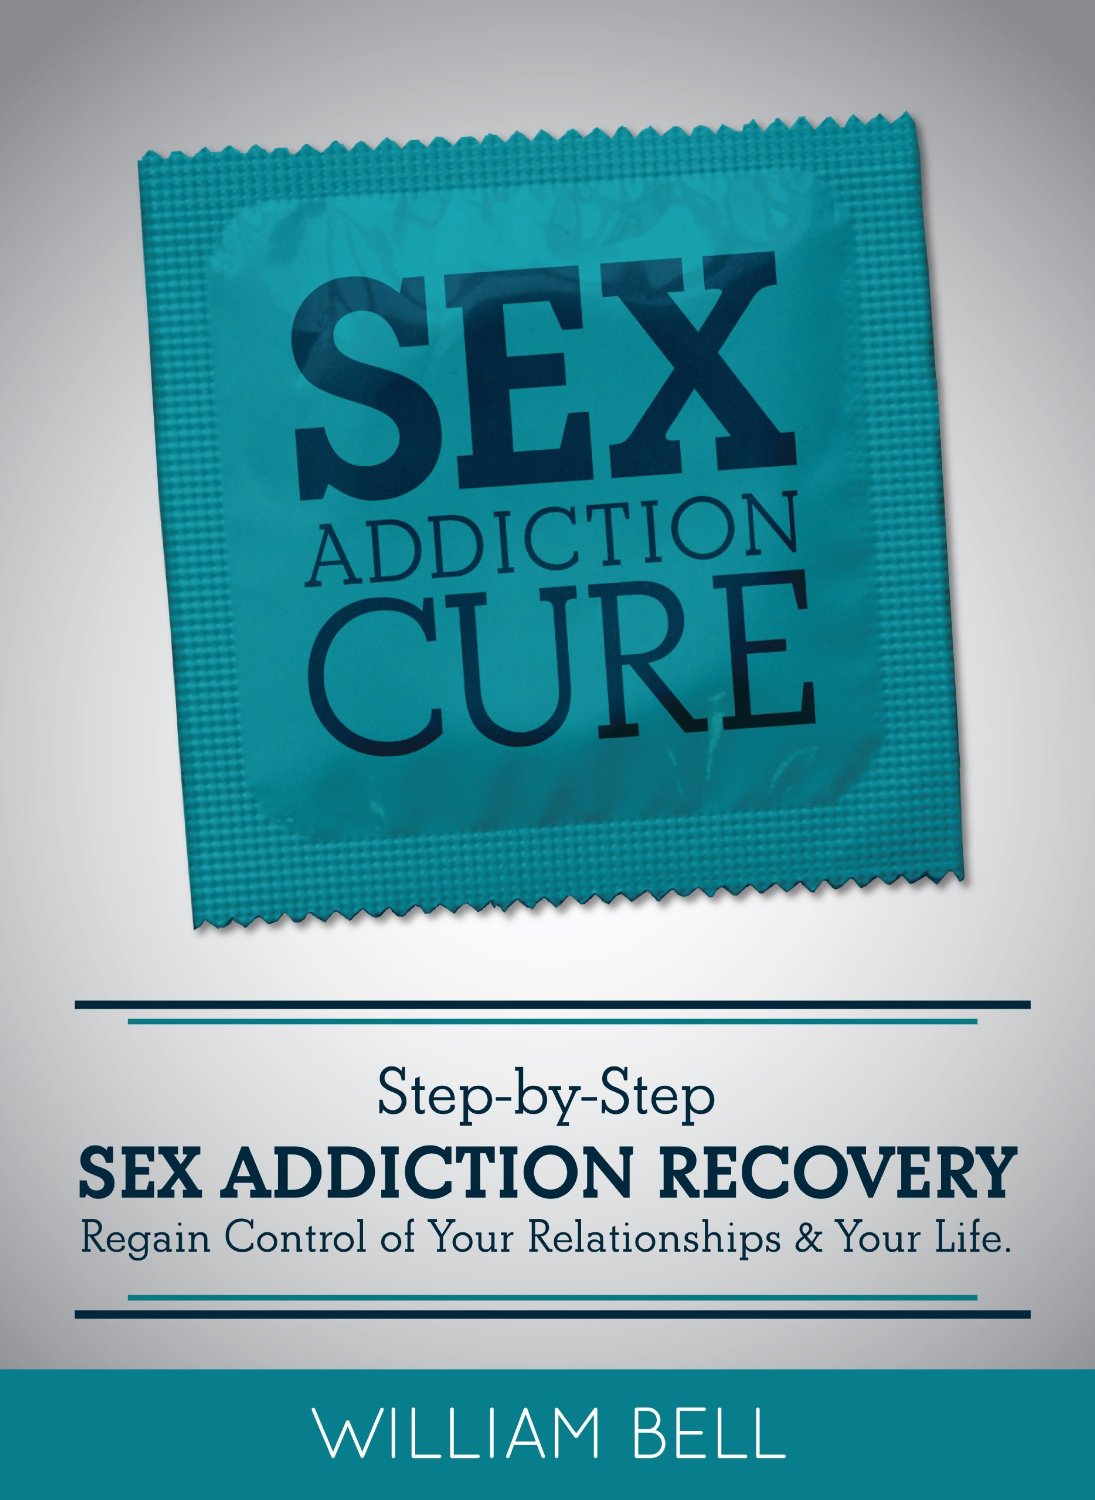 Sex Addiction Cure: Step-by-Step Sex Addiction Recovery to Regain Control of Your Relationships and Your Life by William Bell